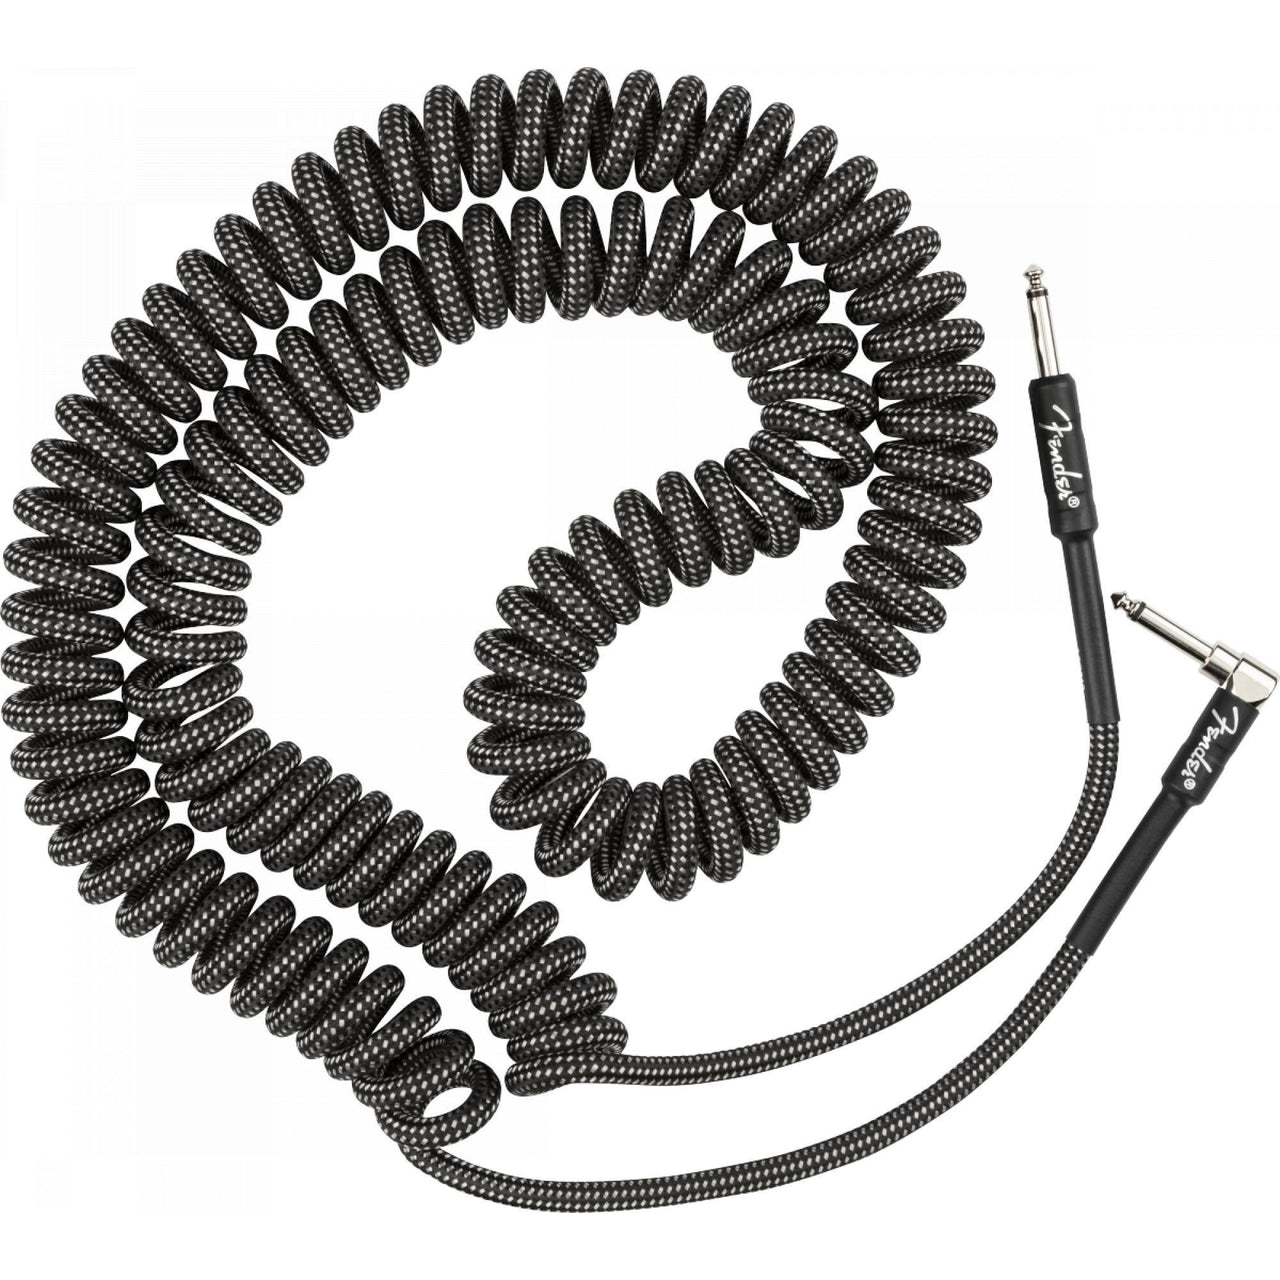 Cable Fender Pro Coil Gry Twd Para Instrumento 9 Metros 0990823048